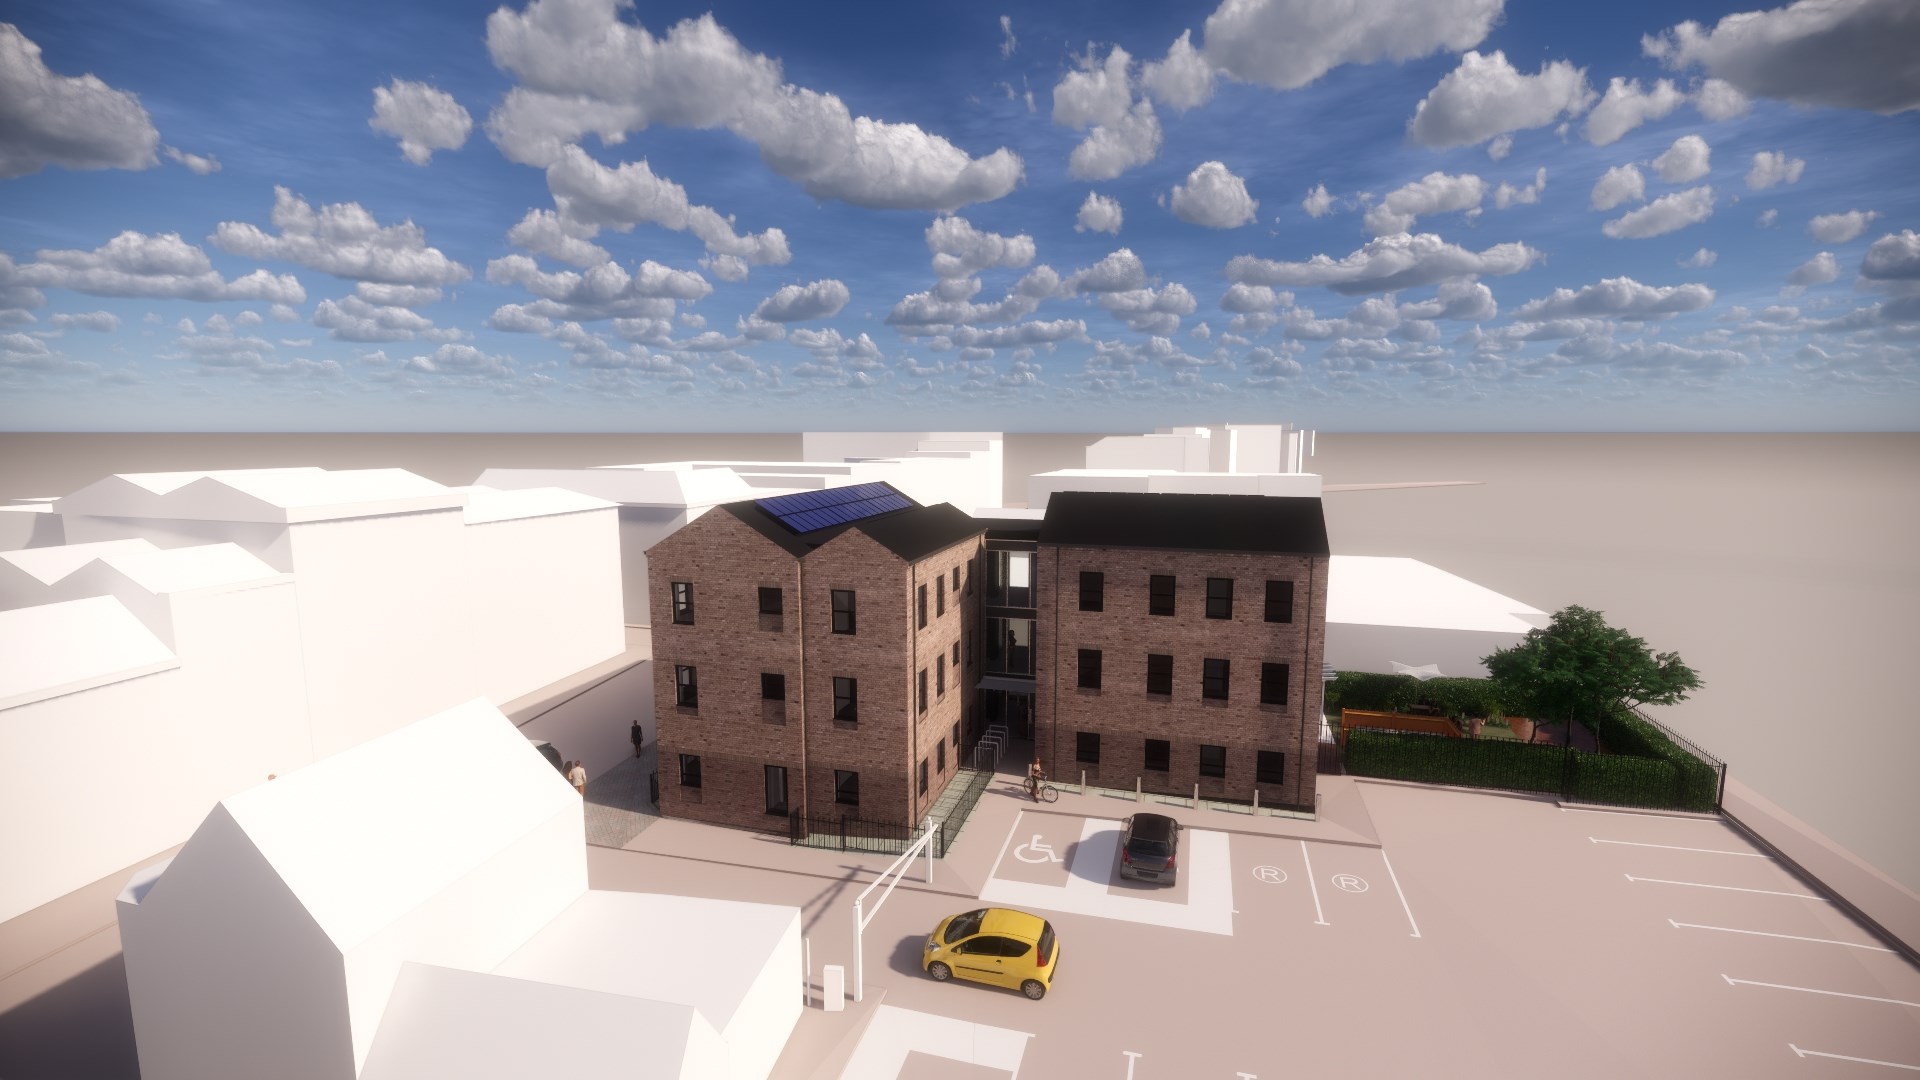 Artist impression of proposed three storey building in Stourport Town Centre